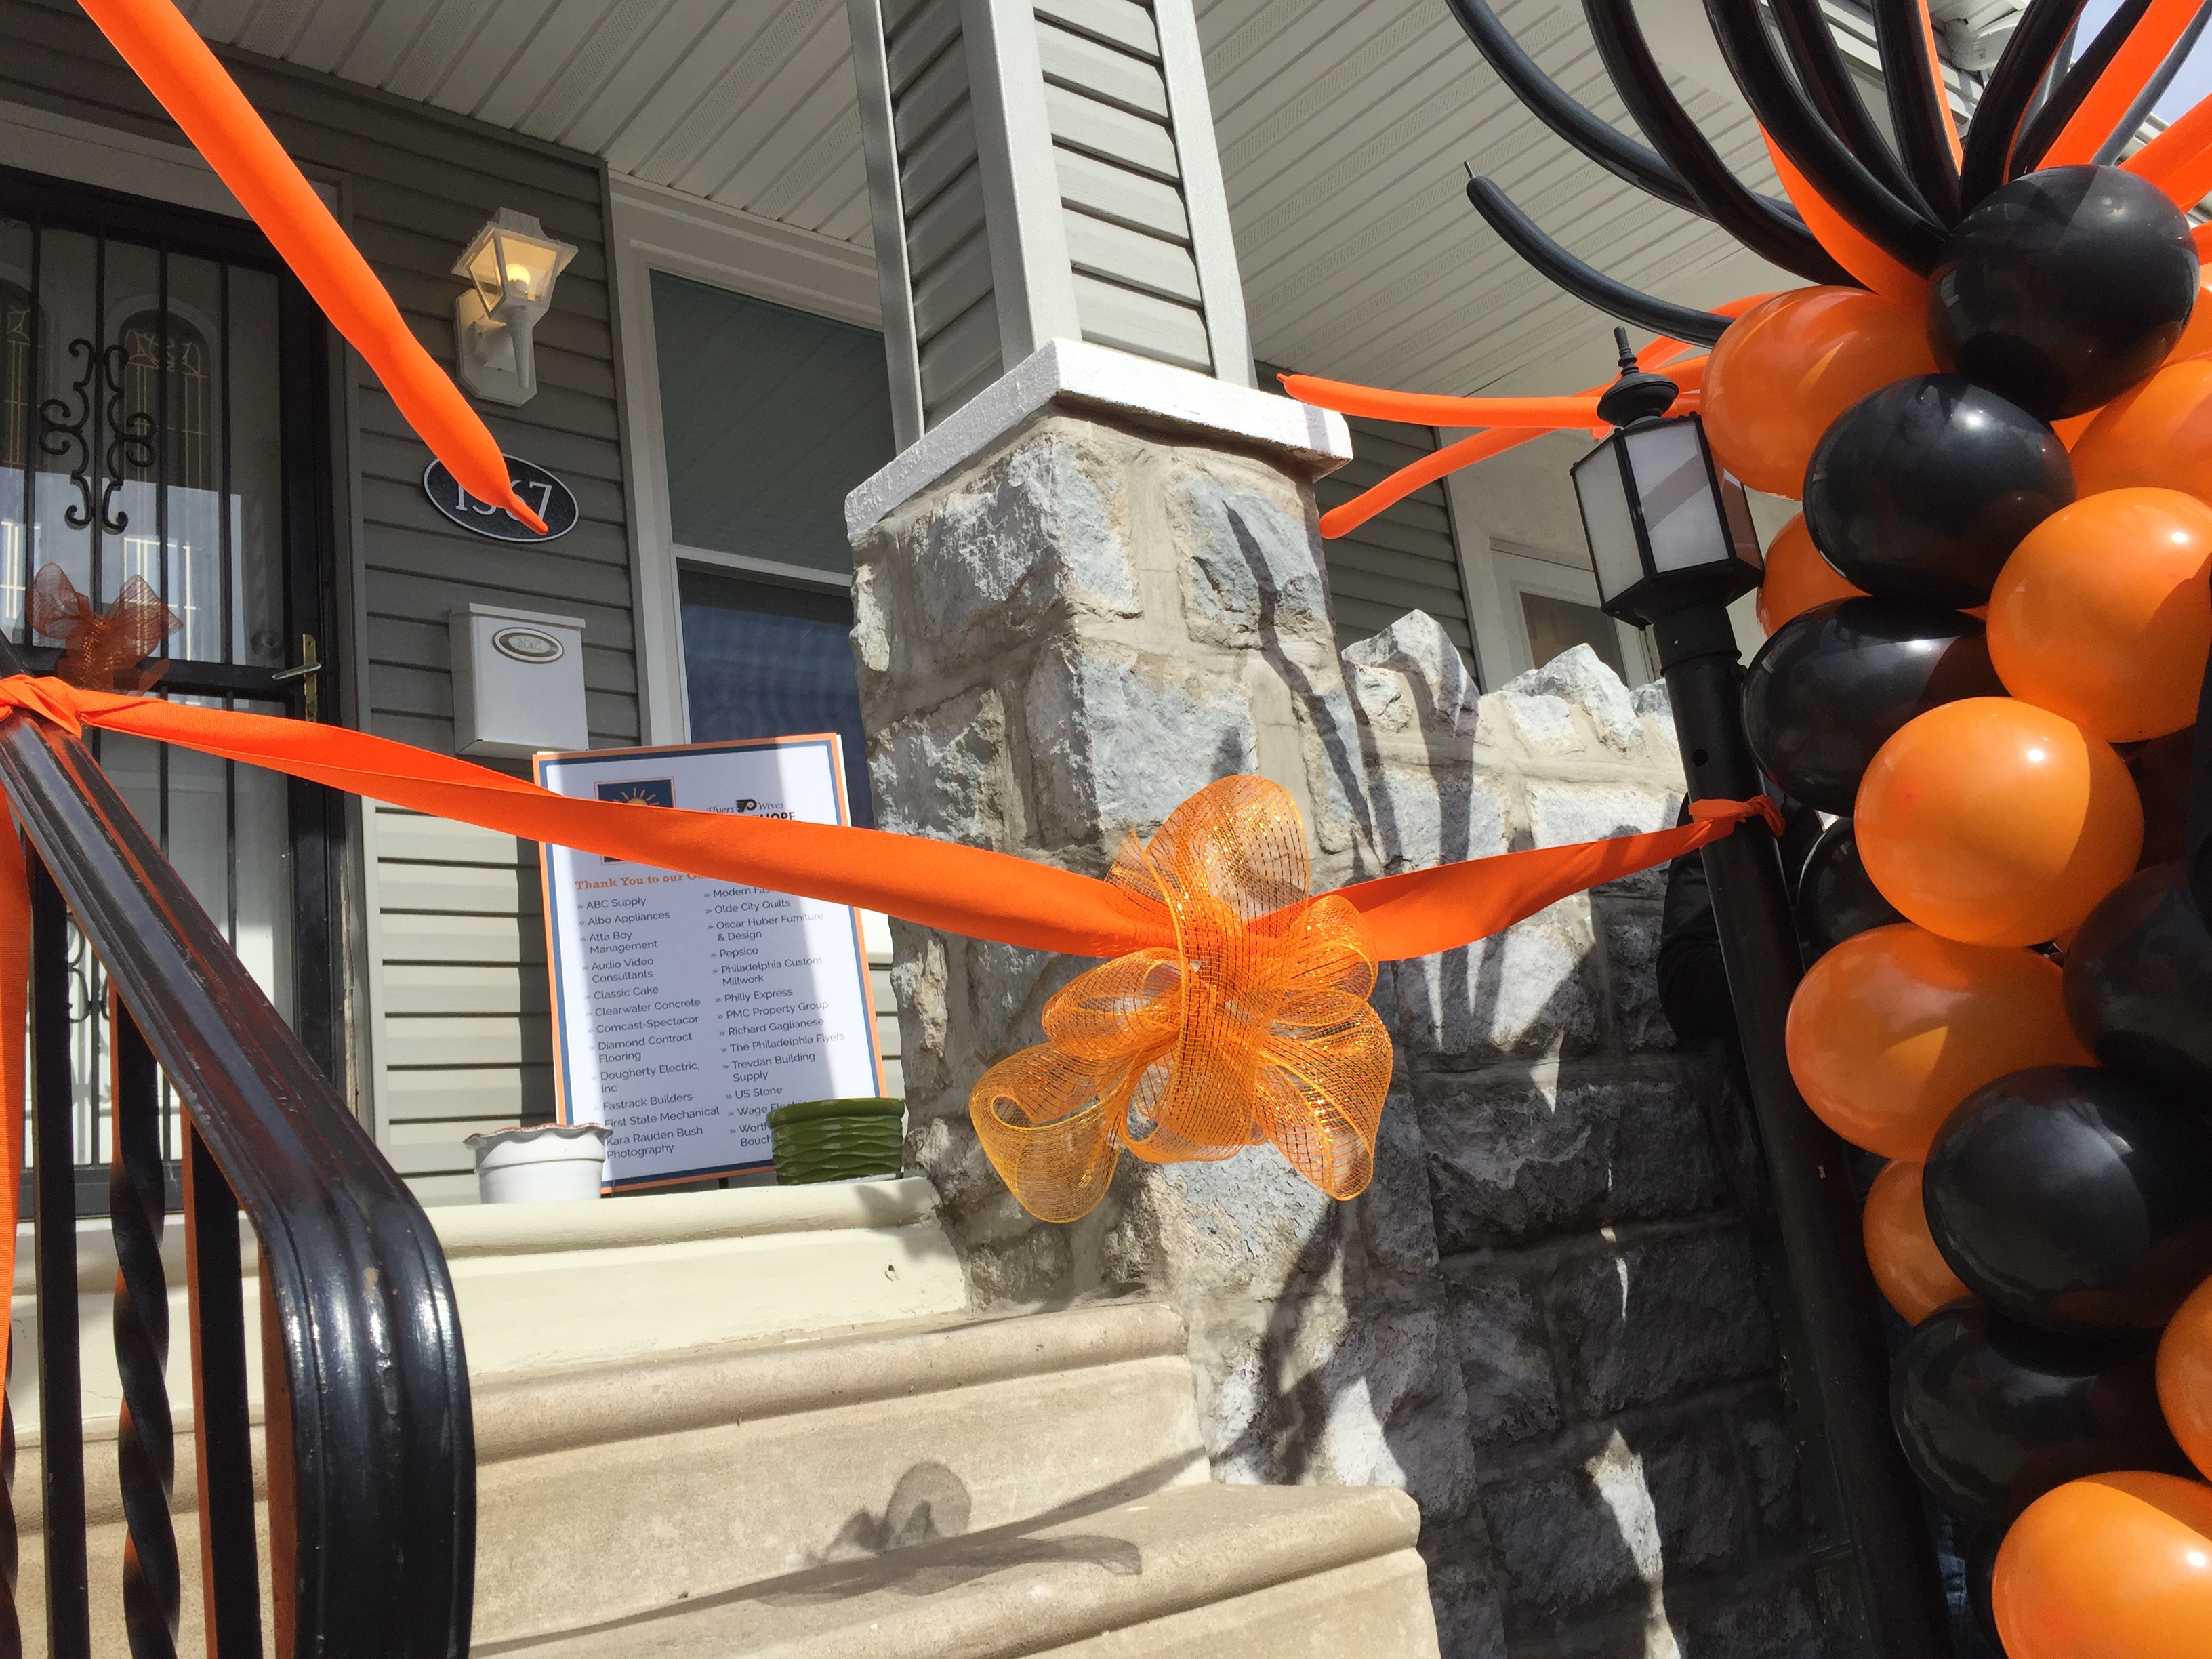 Flyers Wives partnered with Building Hope for Kids to give a sick child and her family a home renovation. (Credit: Kristen Johanson)